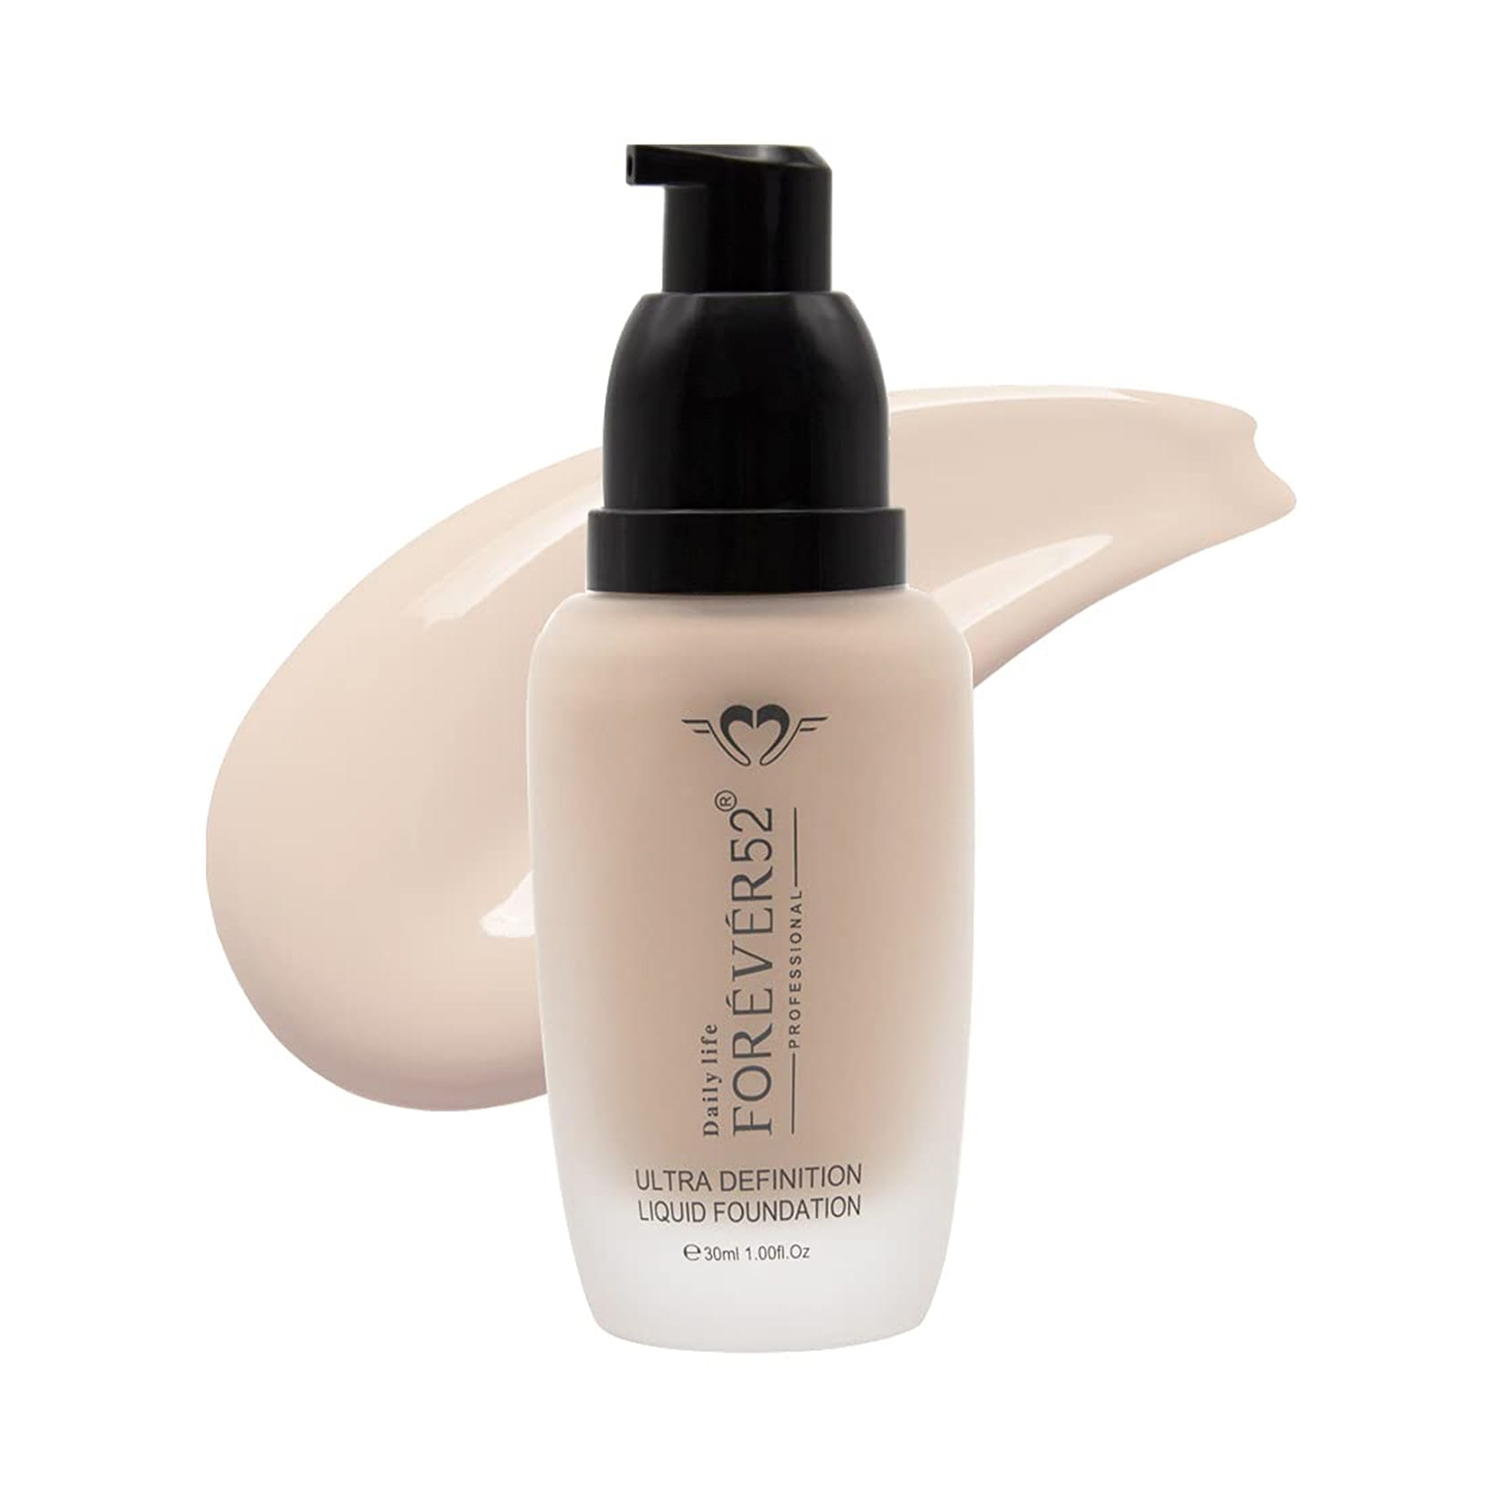 Daily Life Forever52 | Daily Life Forever52 Ultra Definition Liquid Foundation FLF011 (30ml)